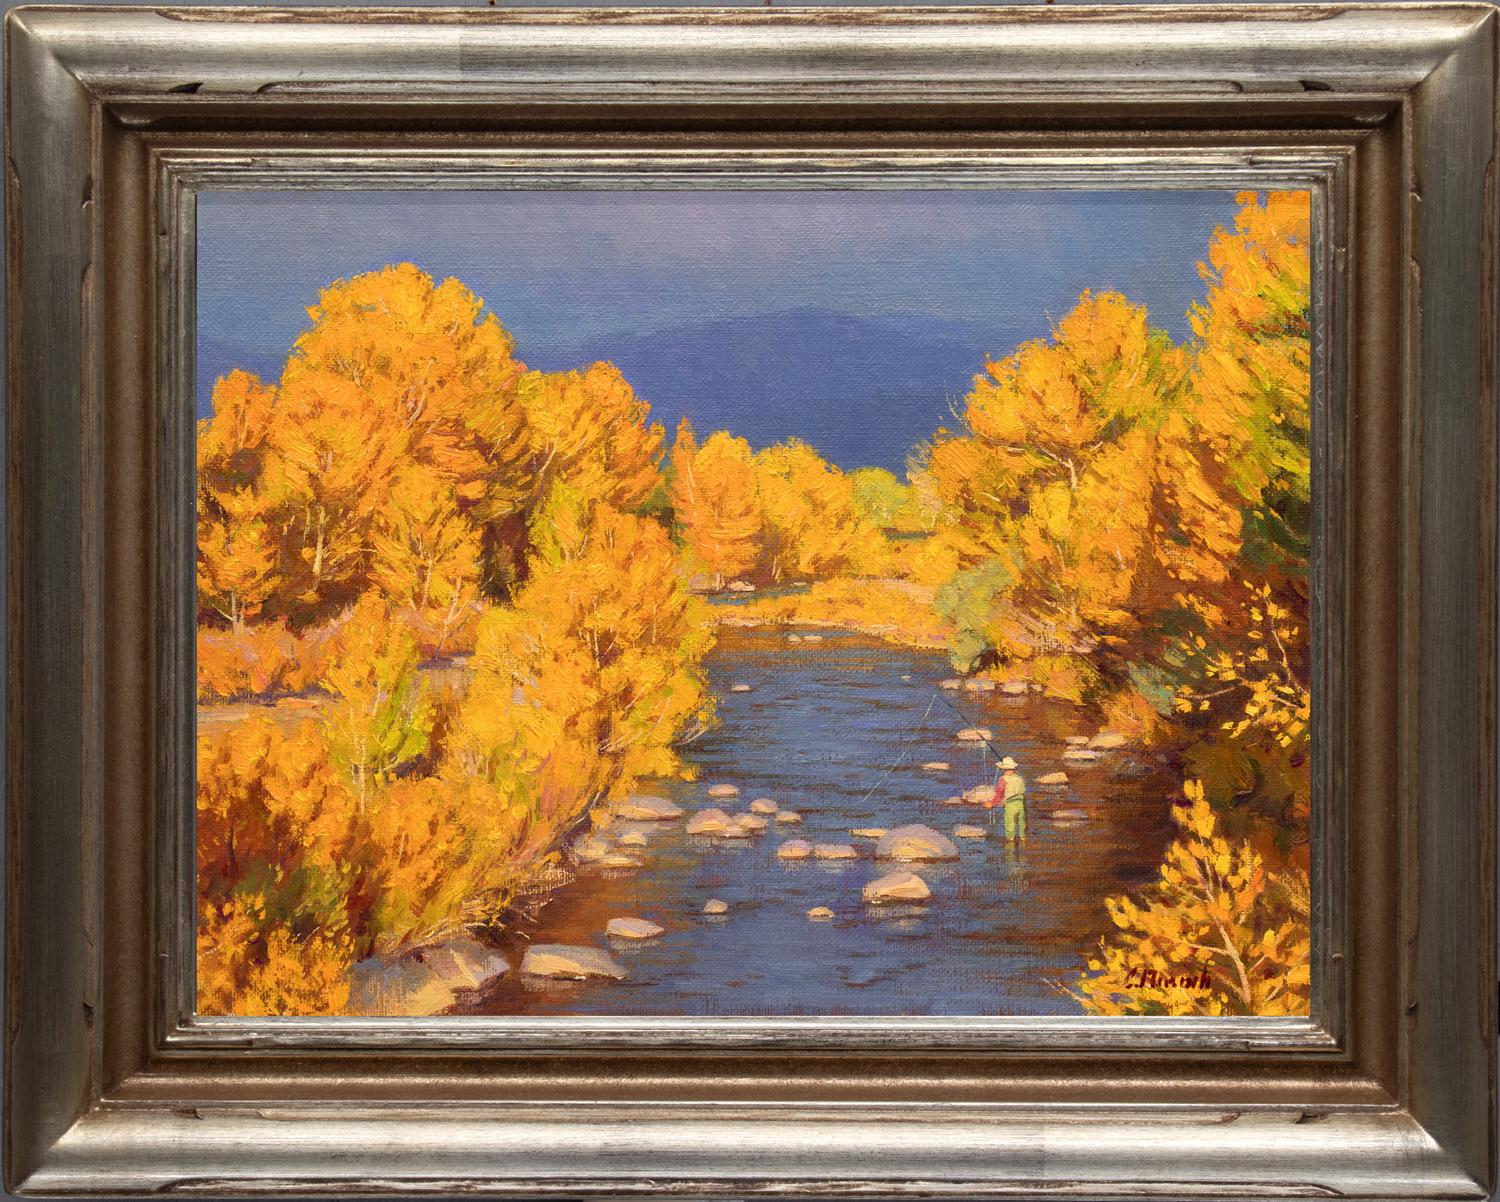 charles muench Landscape Painting - Autumn Textures